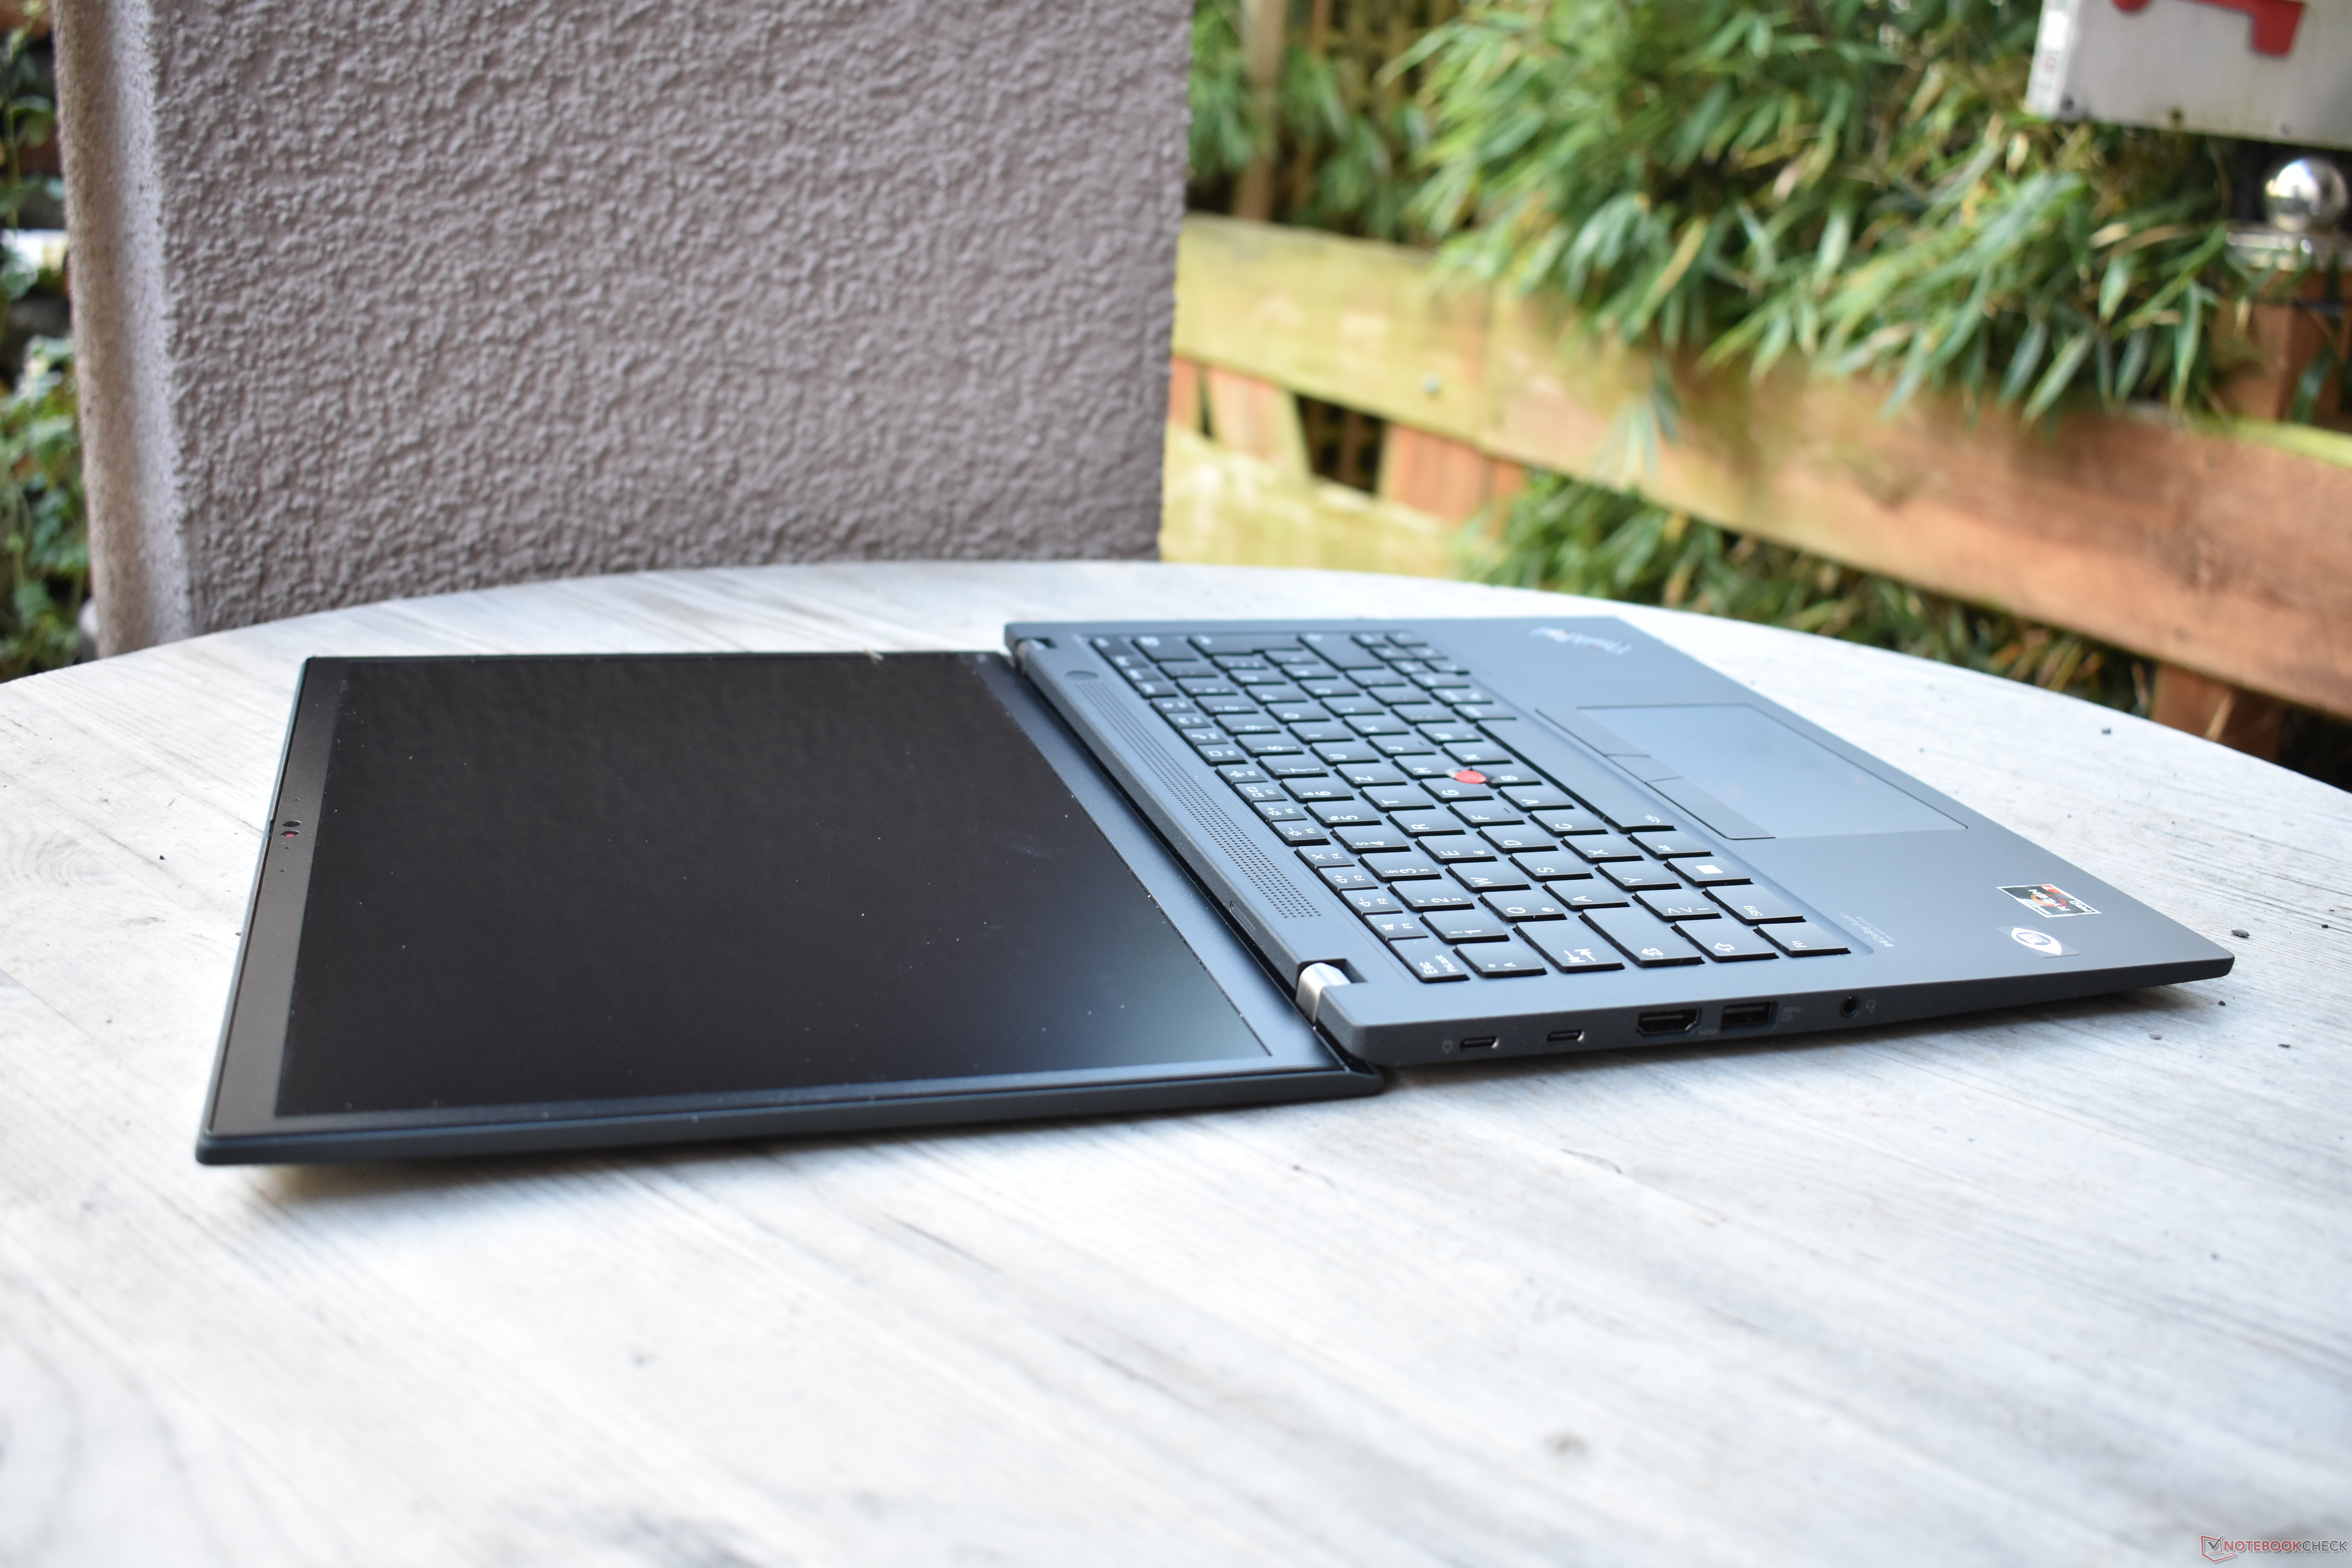 Lenovo ThinkPad T14s G3 AMD is probably the best ThinkPad laptop at the moment